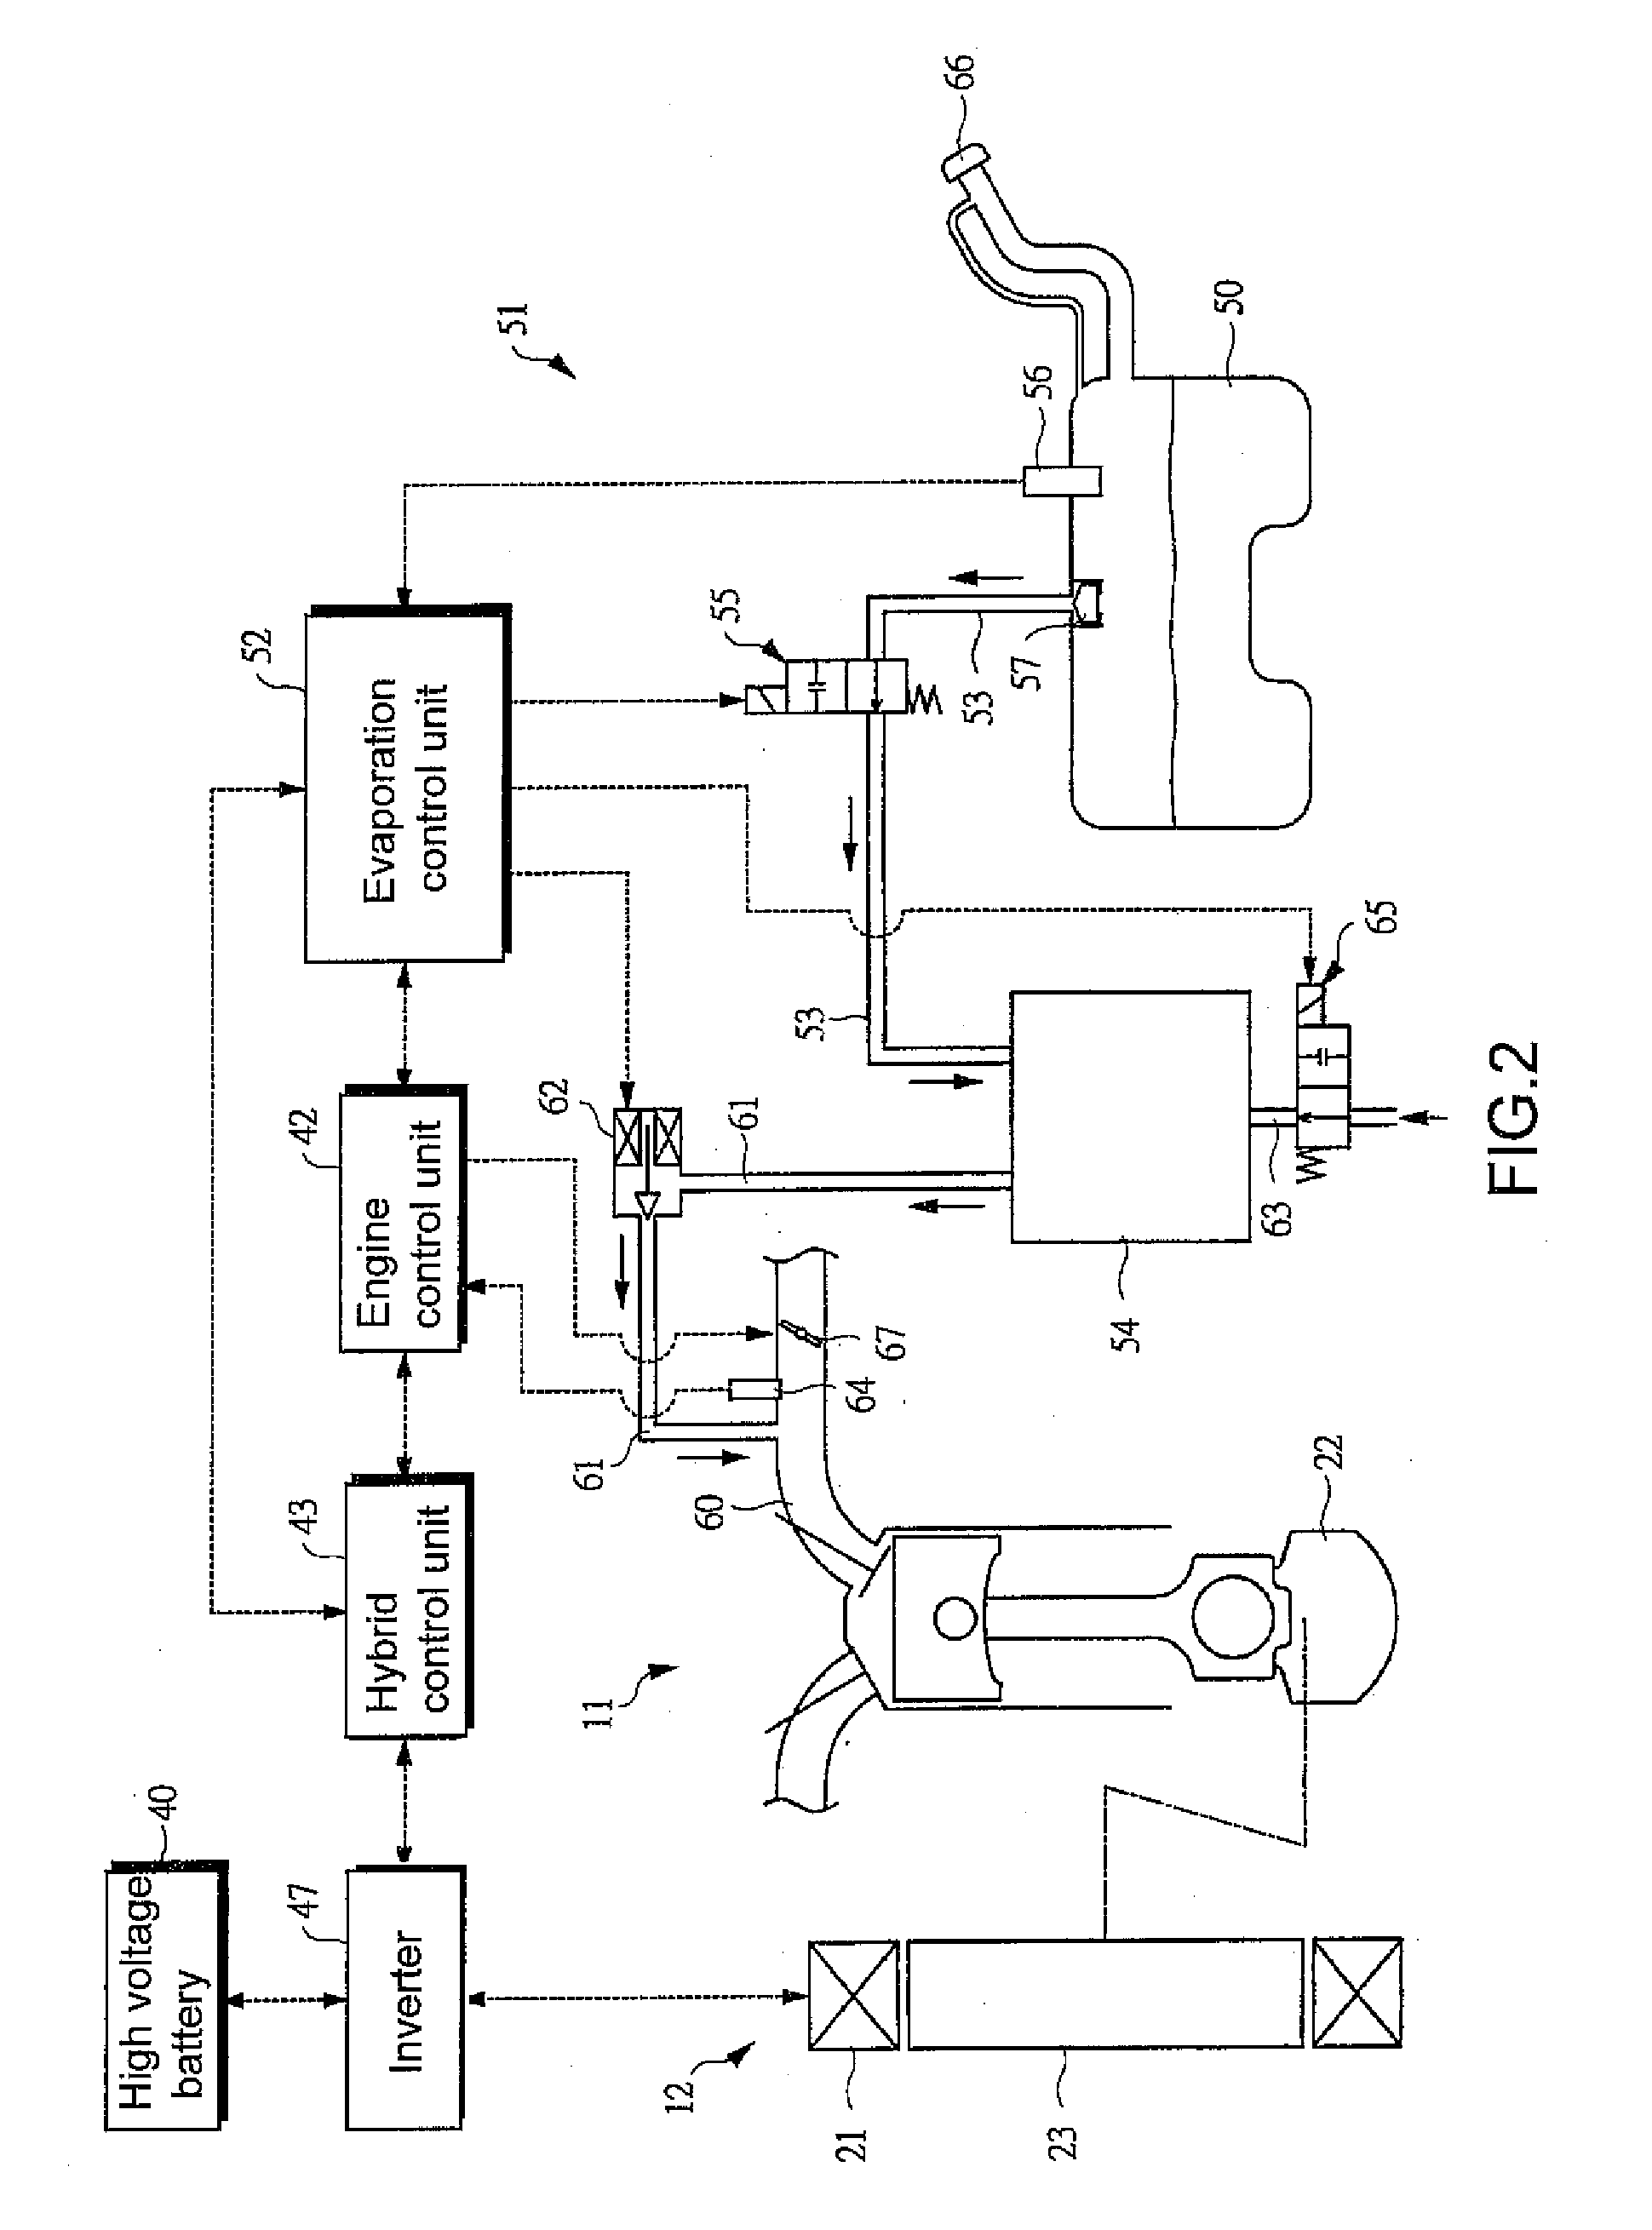 Diagnostic control device for a hybrid vehicle